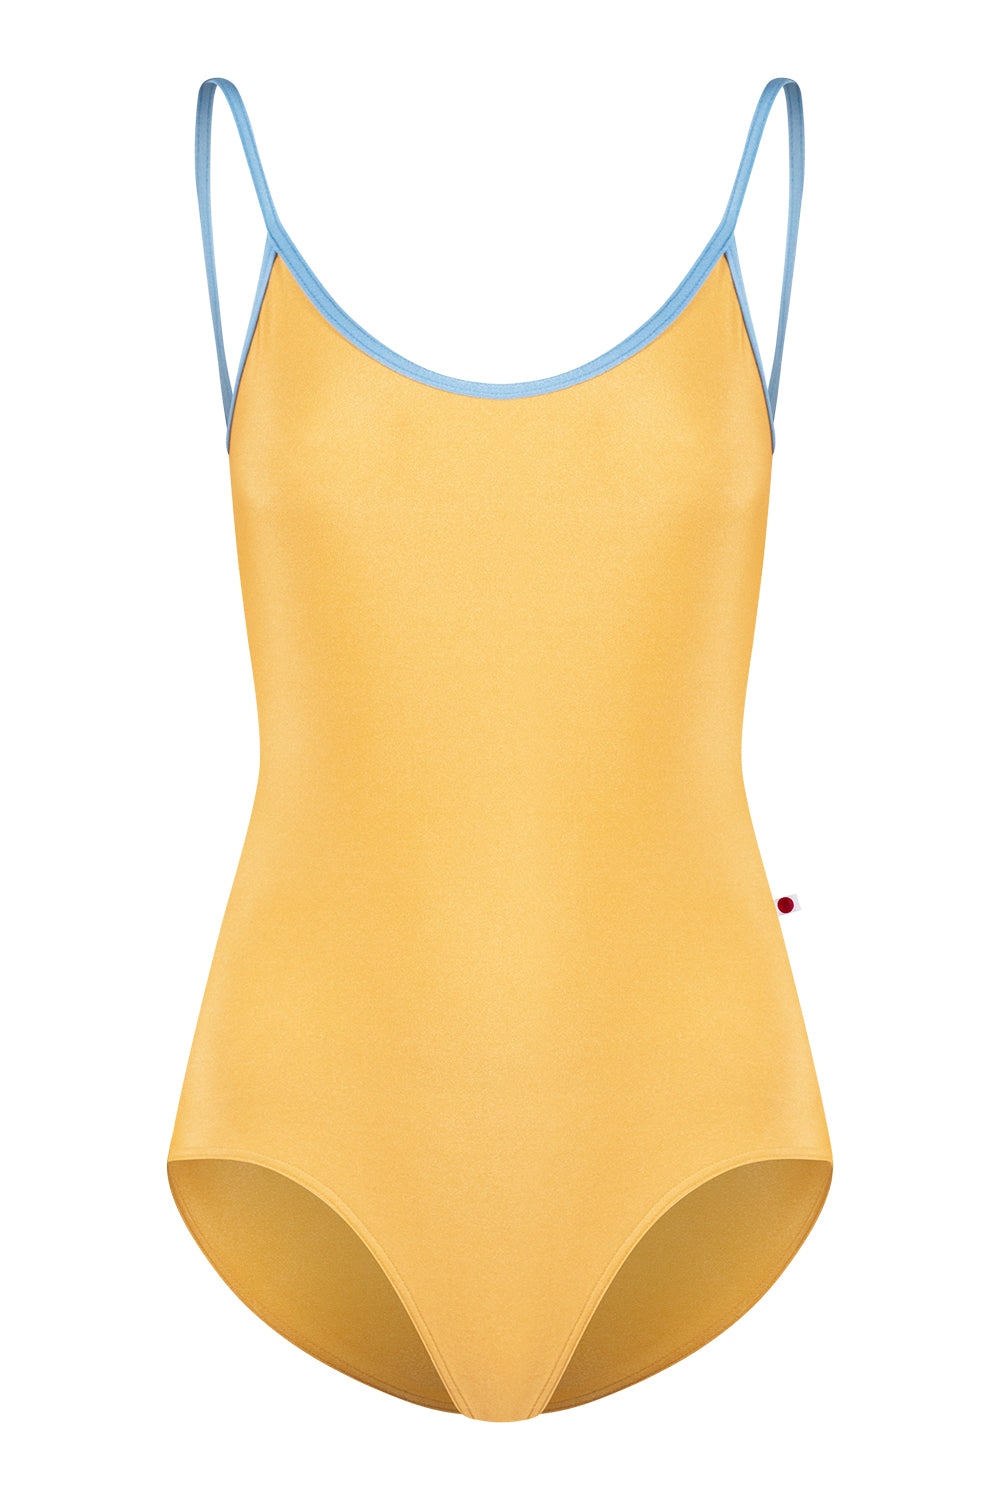 Fiona leotard in N-Daffodil body color with Mesh White top color and N-Moontide trim color